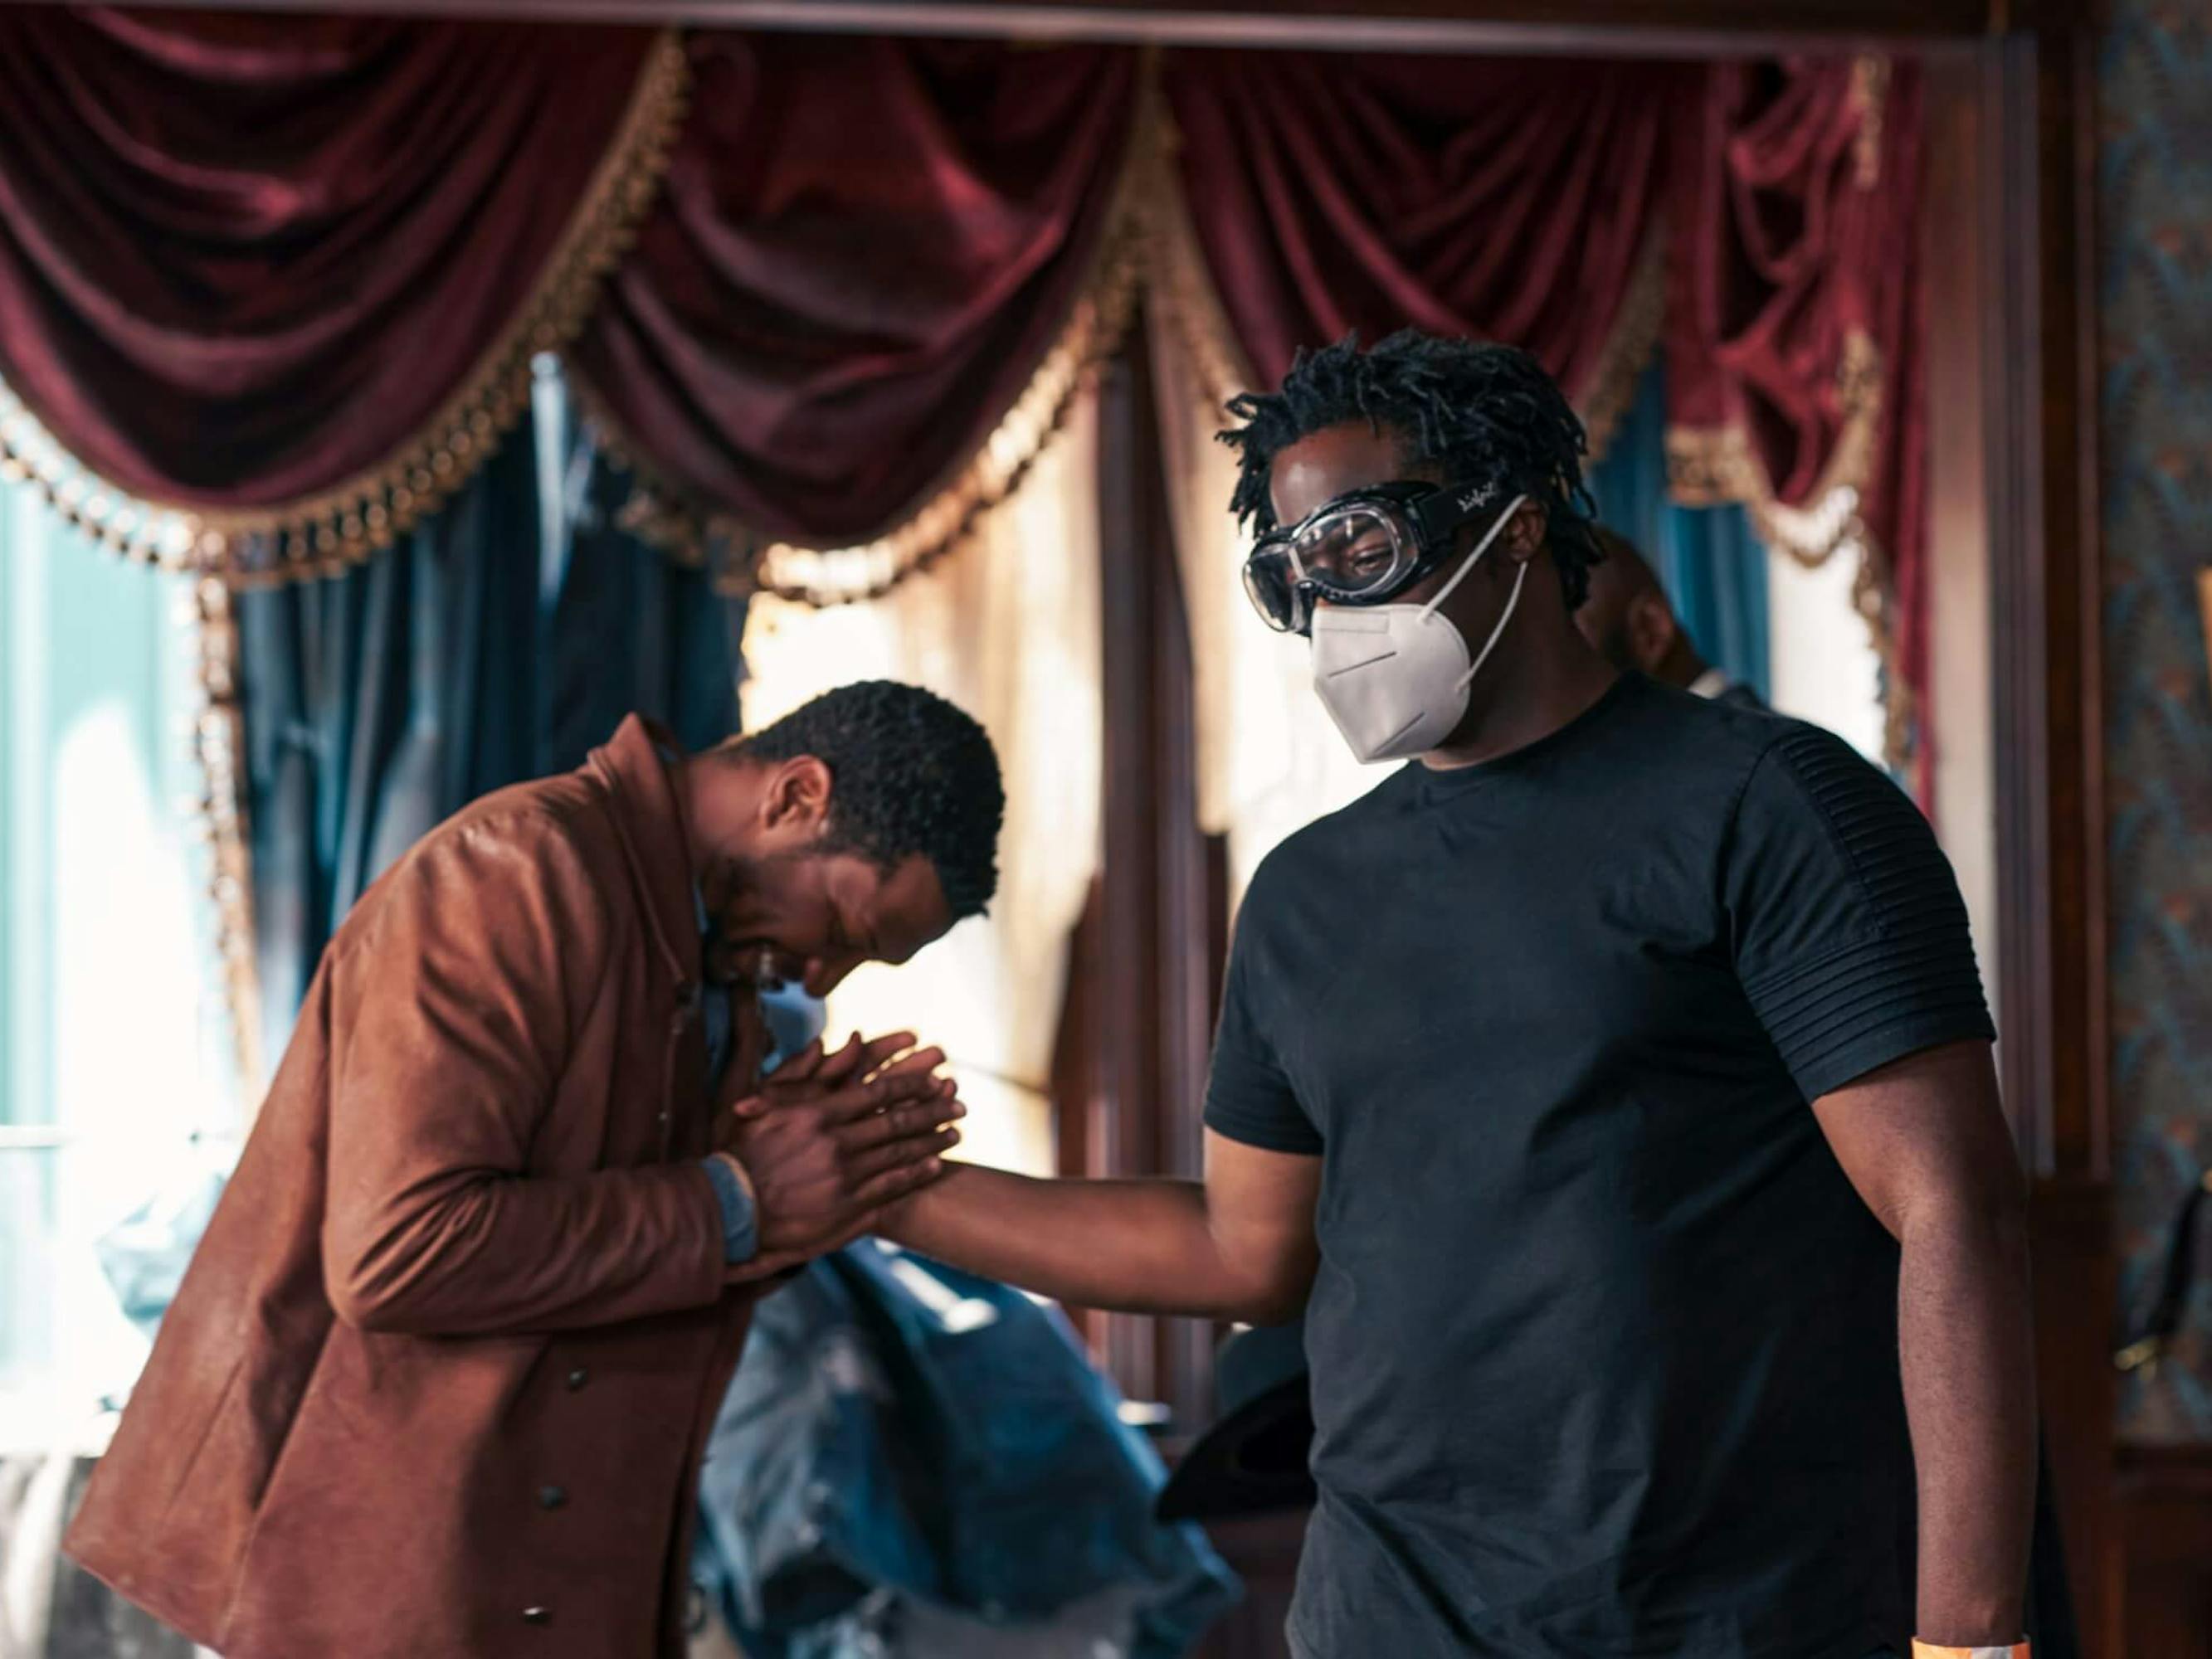 Jonathan Majors and Jeymes Samuel stand together in an ornately decorated room. Samuel wears all black, goggles, and a white mask. Majors holds Samuel hand in his and bends over it, as if in prayer. Majors wears a brown leather jacket.